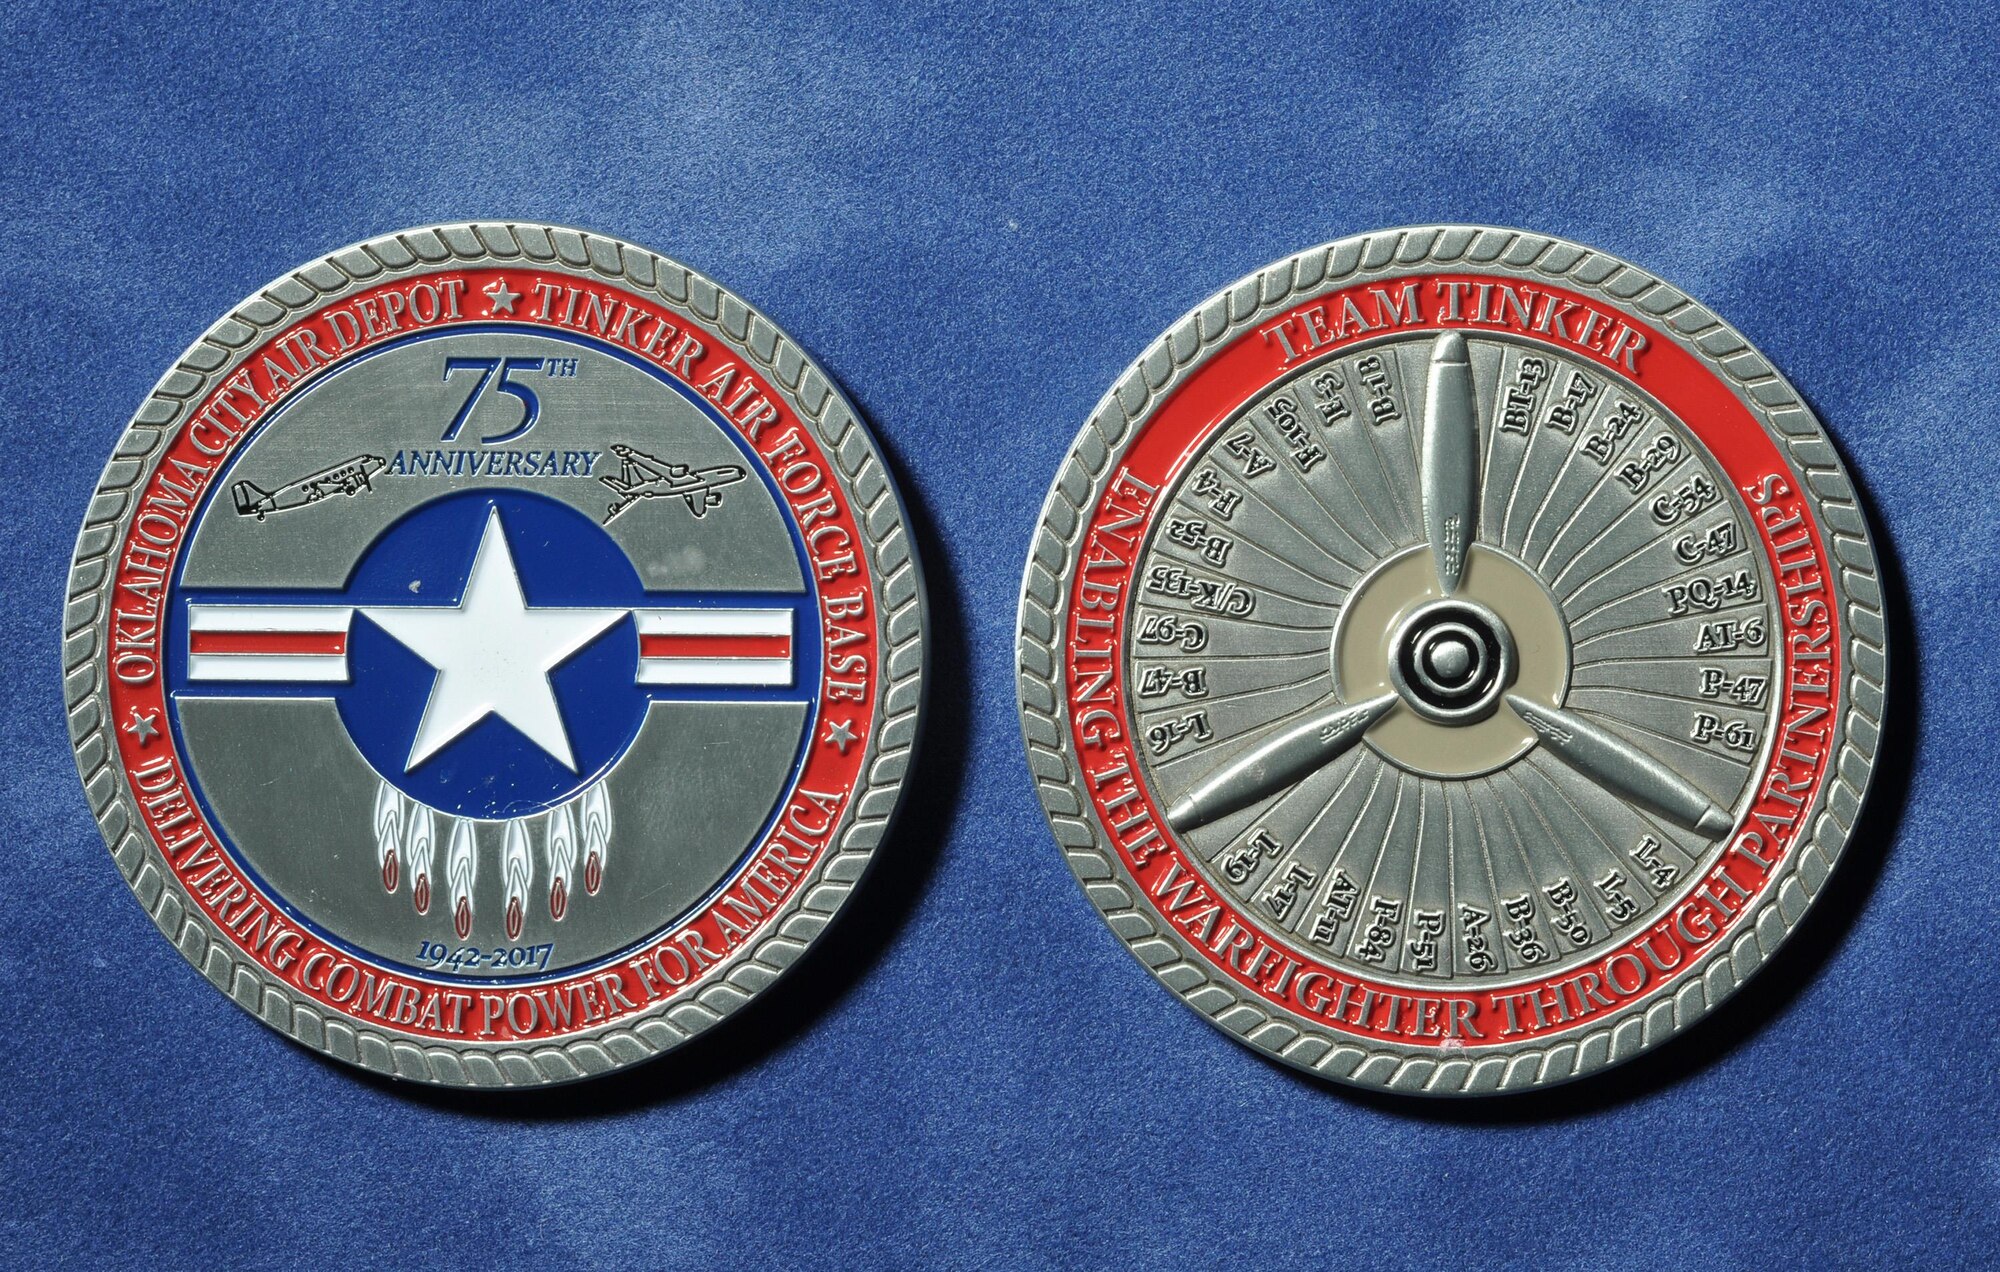 The front (left) and back of Tinker's 75th Anniversary coin. The front features the anniversary logo, while the back lists many of the aircraft that have gone through depot maintenance at Tinker, starting with the BT-13 and working around the fan blades to the B-1.